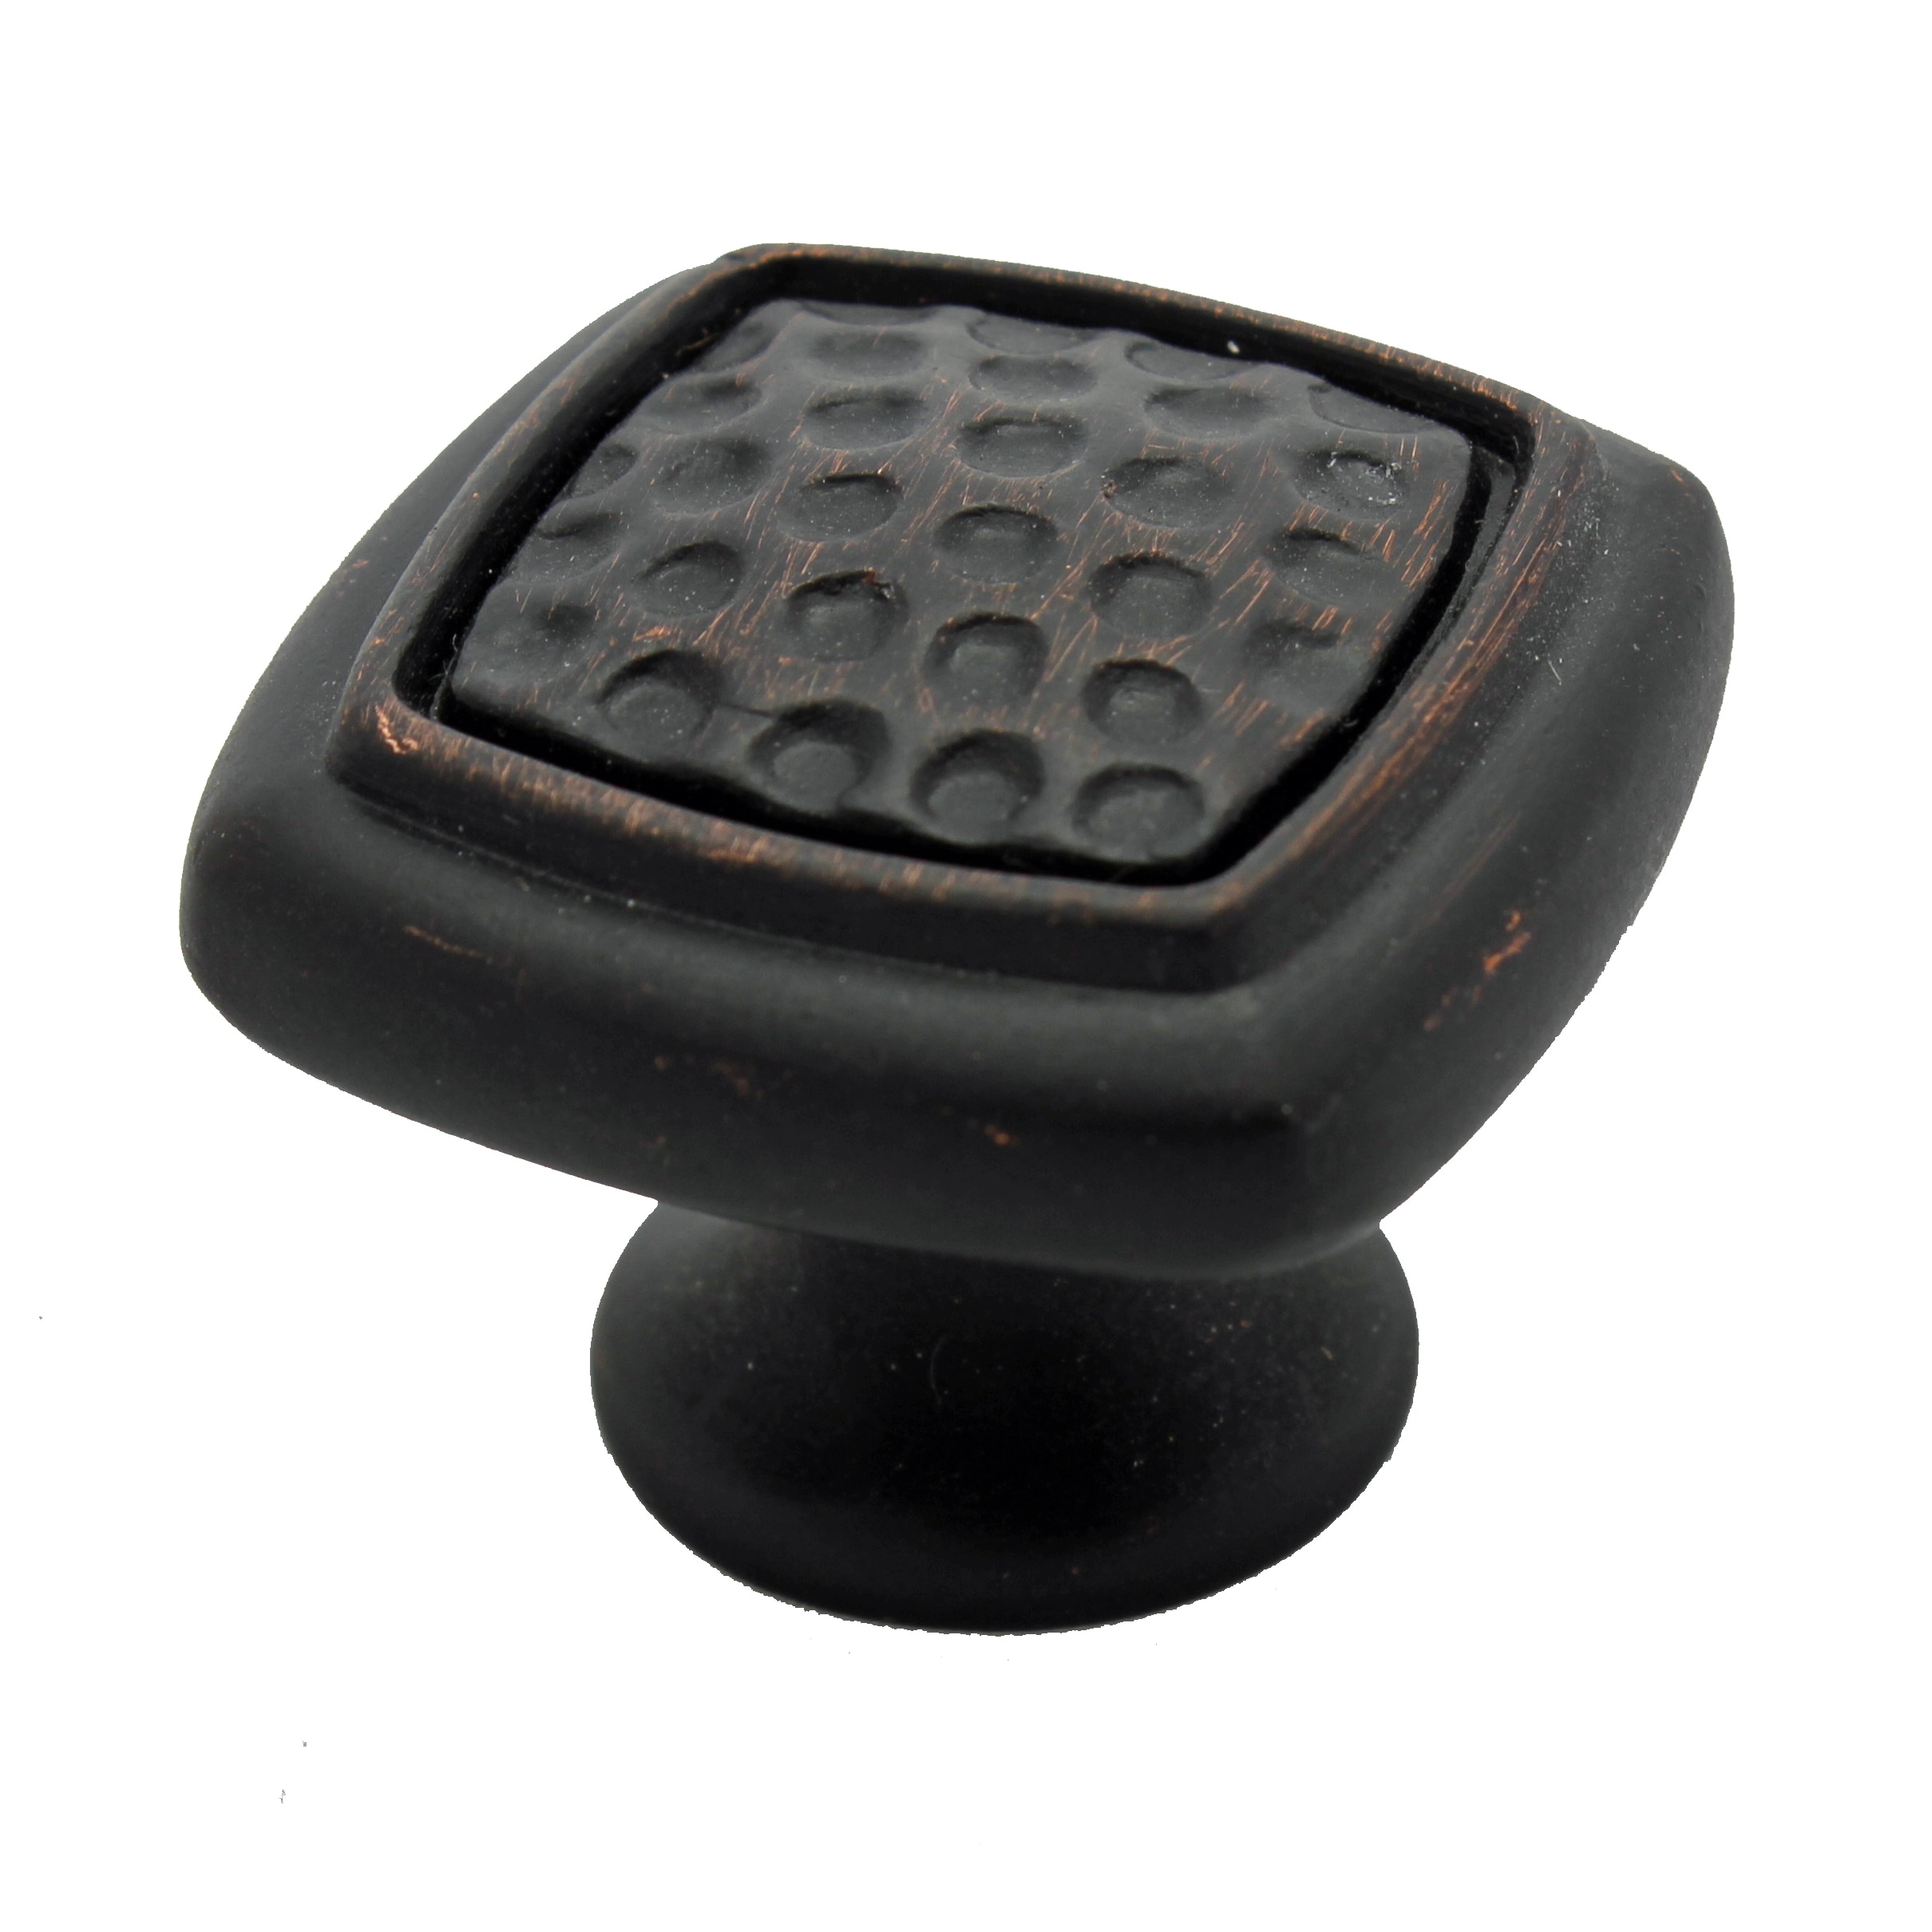 GlideRite 1-1/4 in. Transitional Dotted Square Cabinet Knobs, Oil Rubbed Bronze, Pack of 10 - image 1 of 4